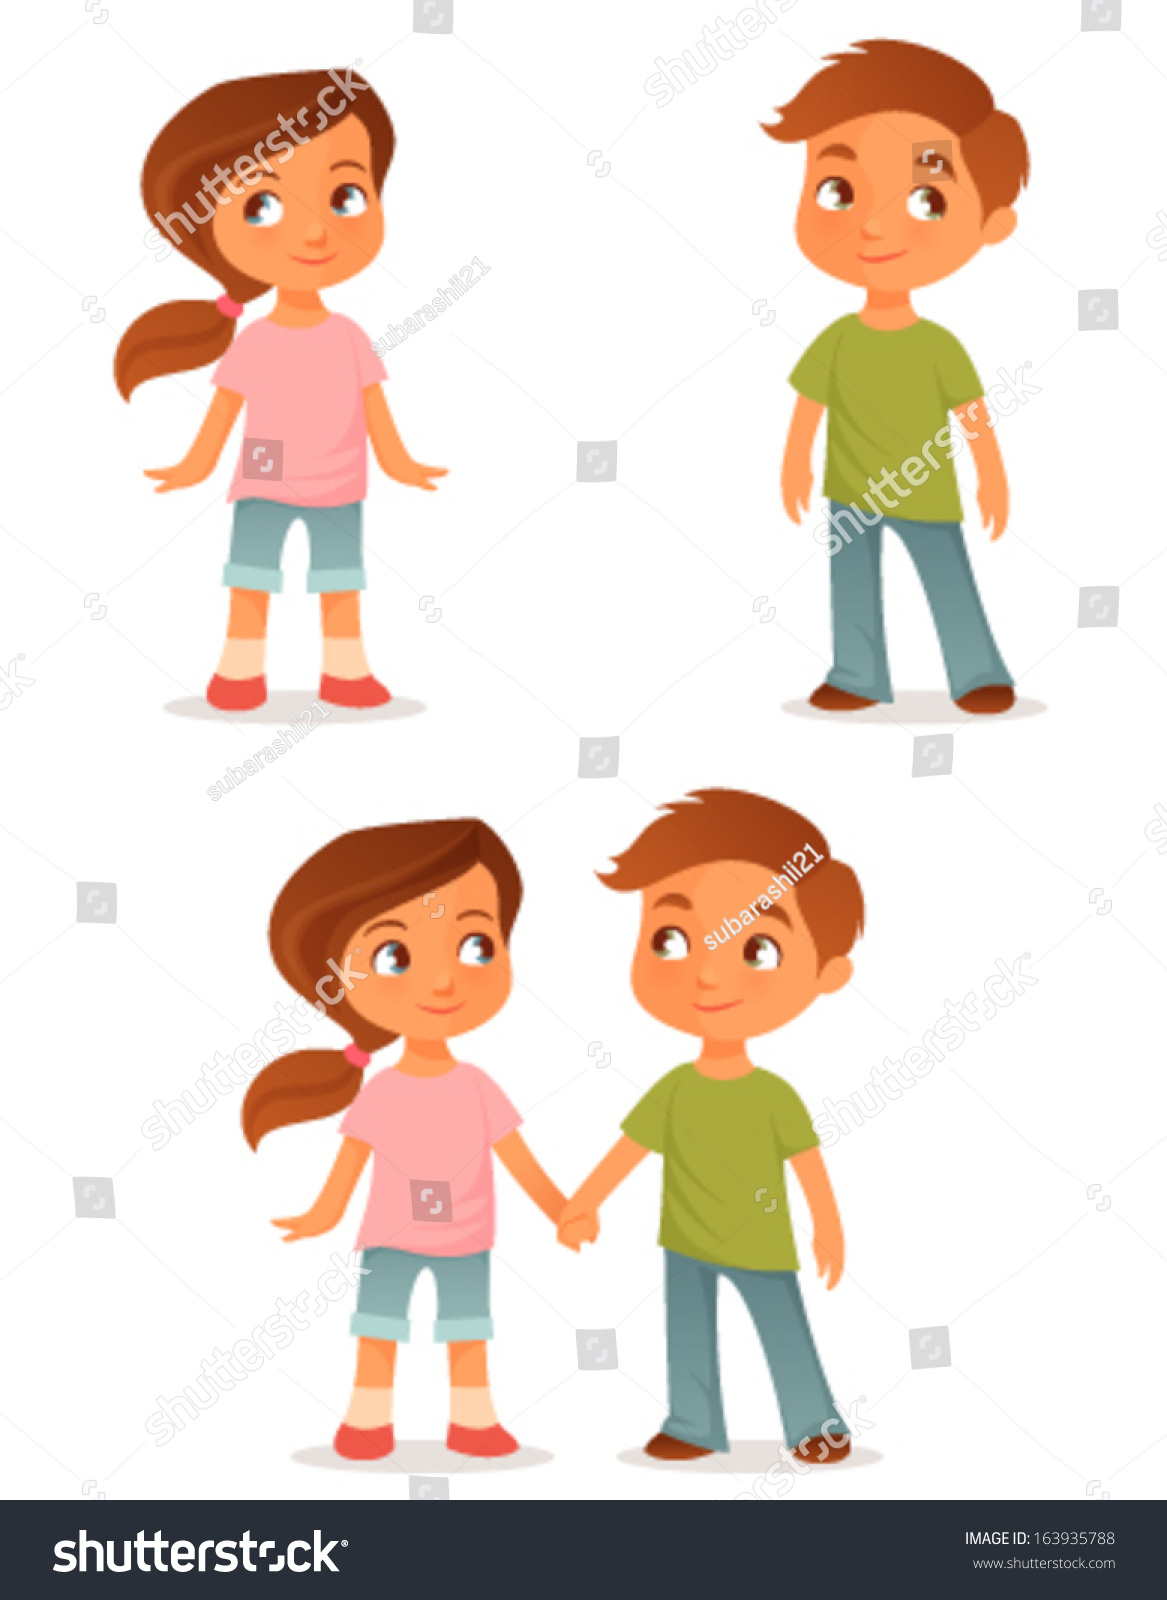 Cute Cartoon Kids, Either A Brother And Sister Or Little Friends